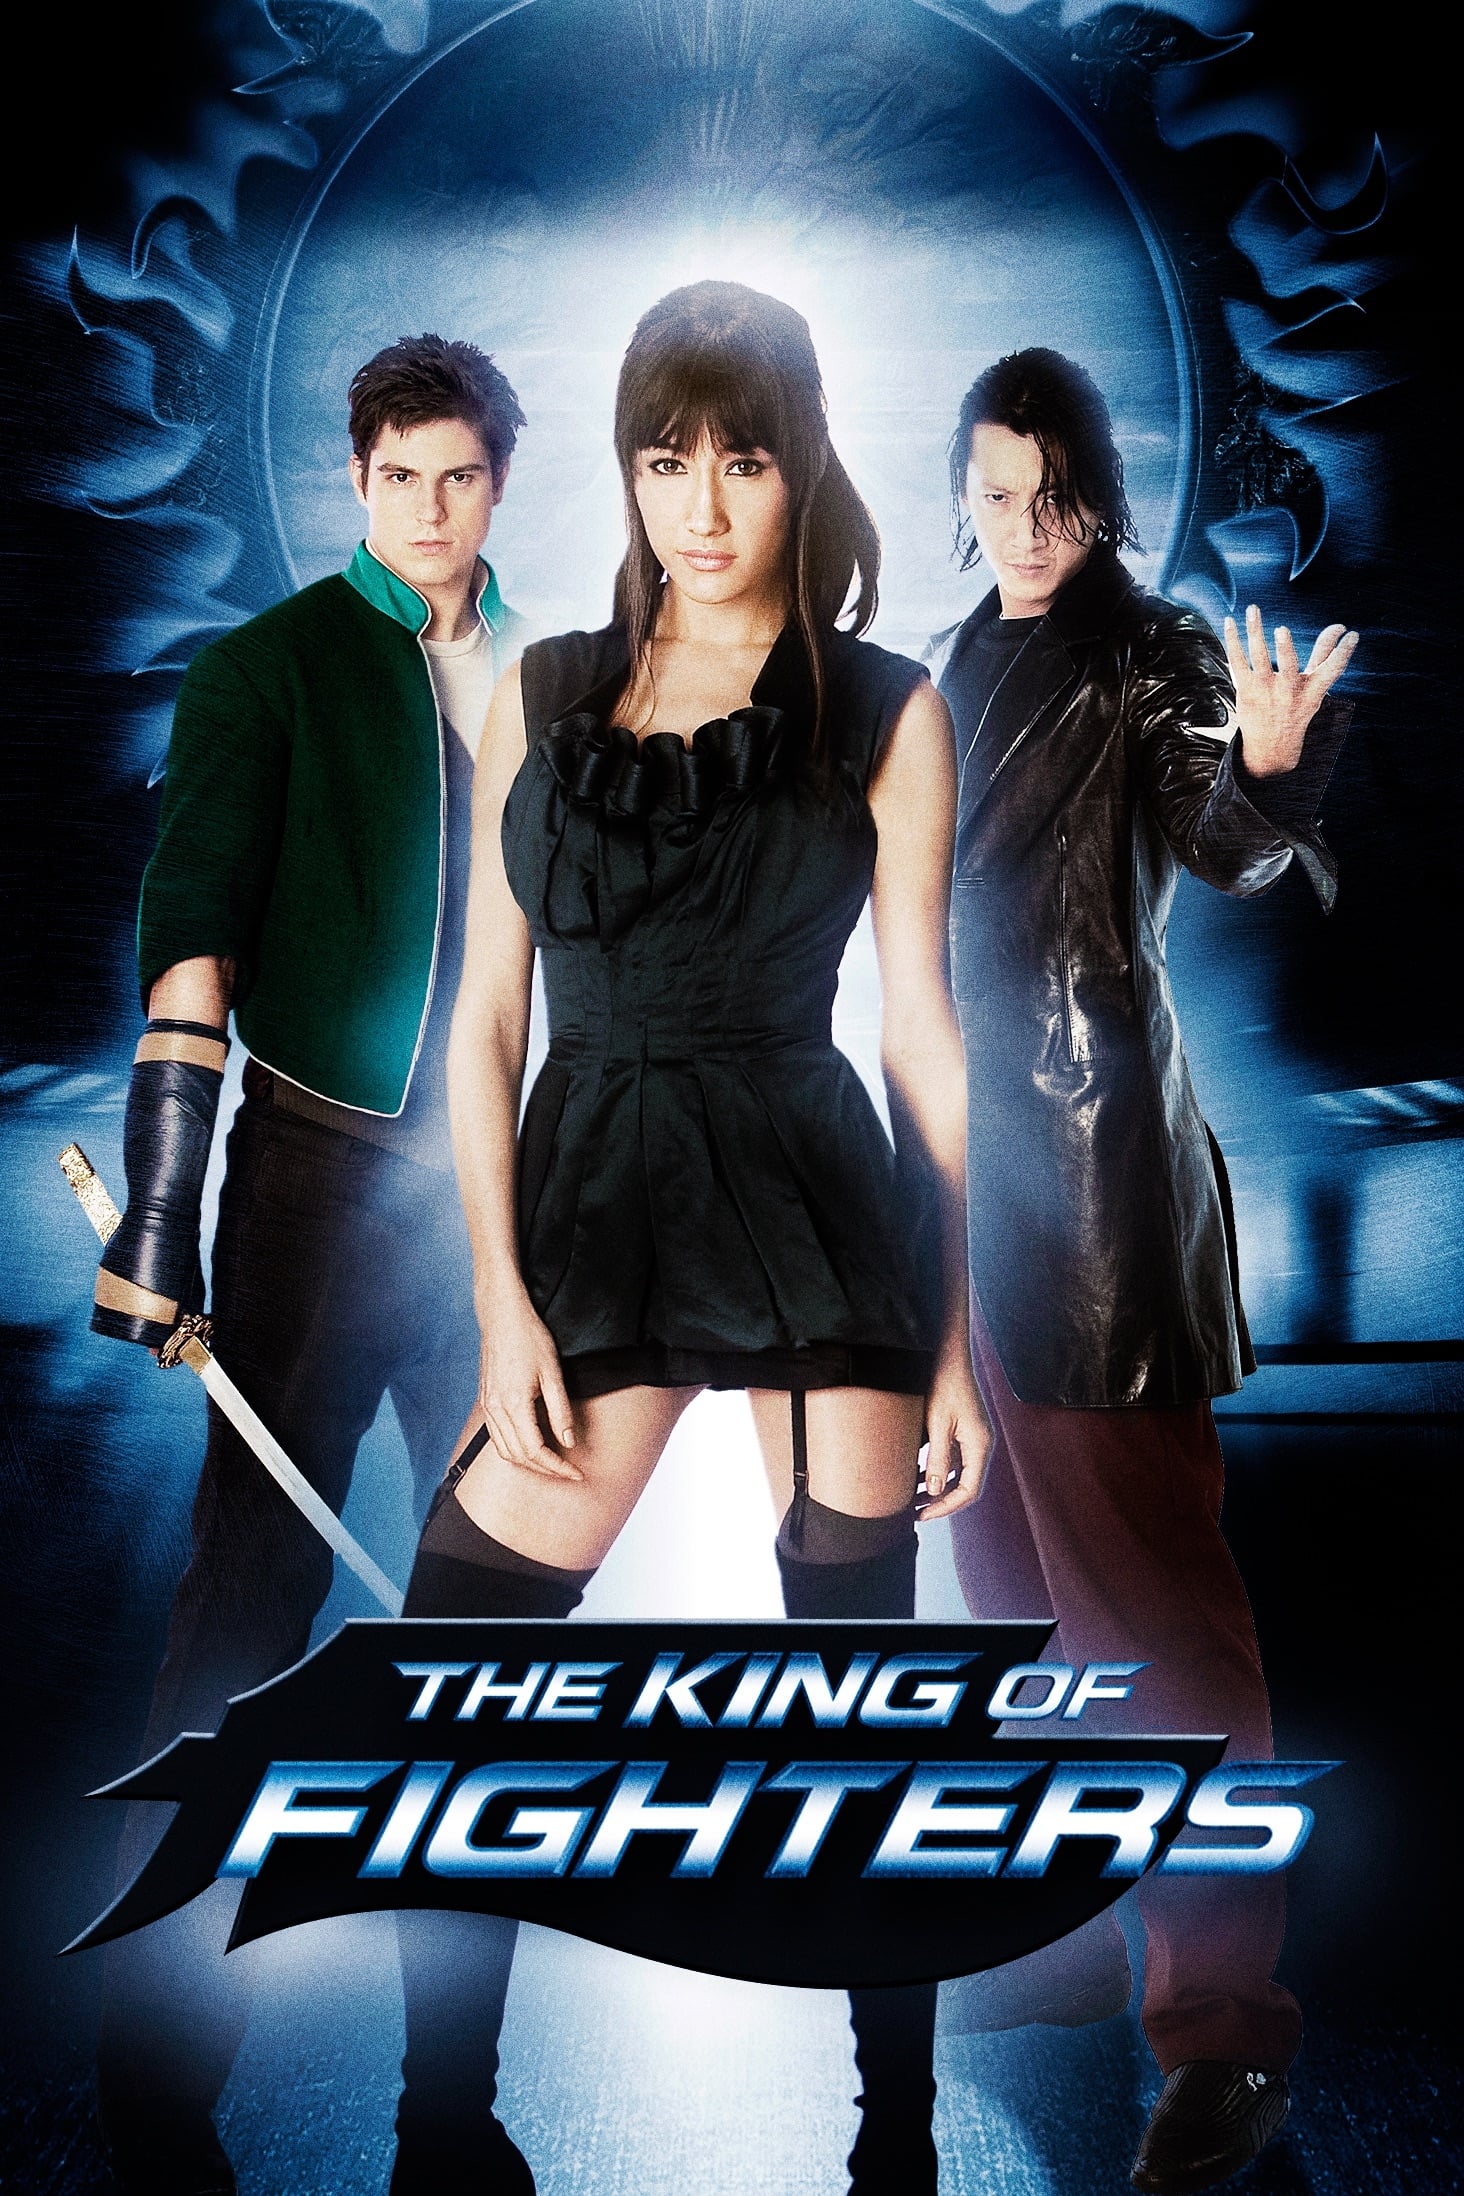 King of Fighters: A Batalha Final (2010)